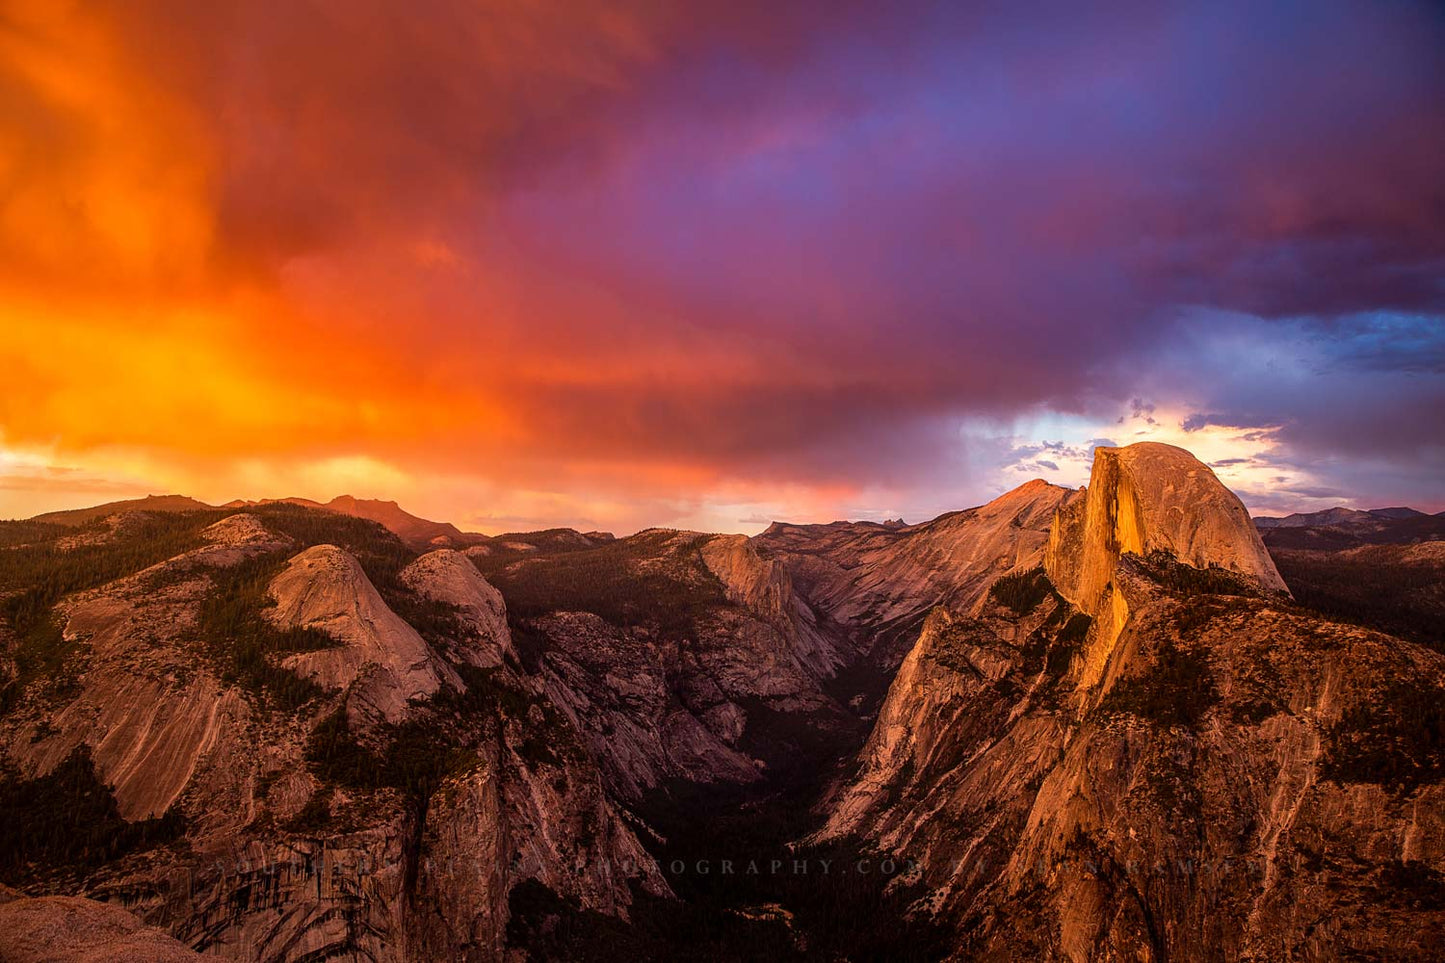 Landscape photography print of colorful storm clouds over Half Dome and Yosemite Valley on a stormy evening in Yosemite National Park, California by Sean Ramsey of Southern Plains Photography.